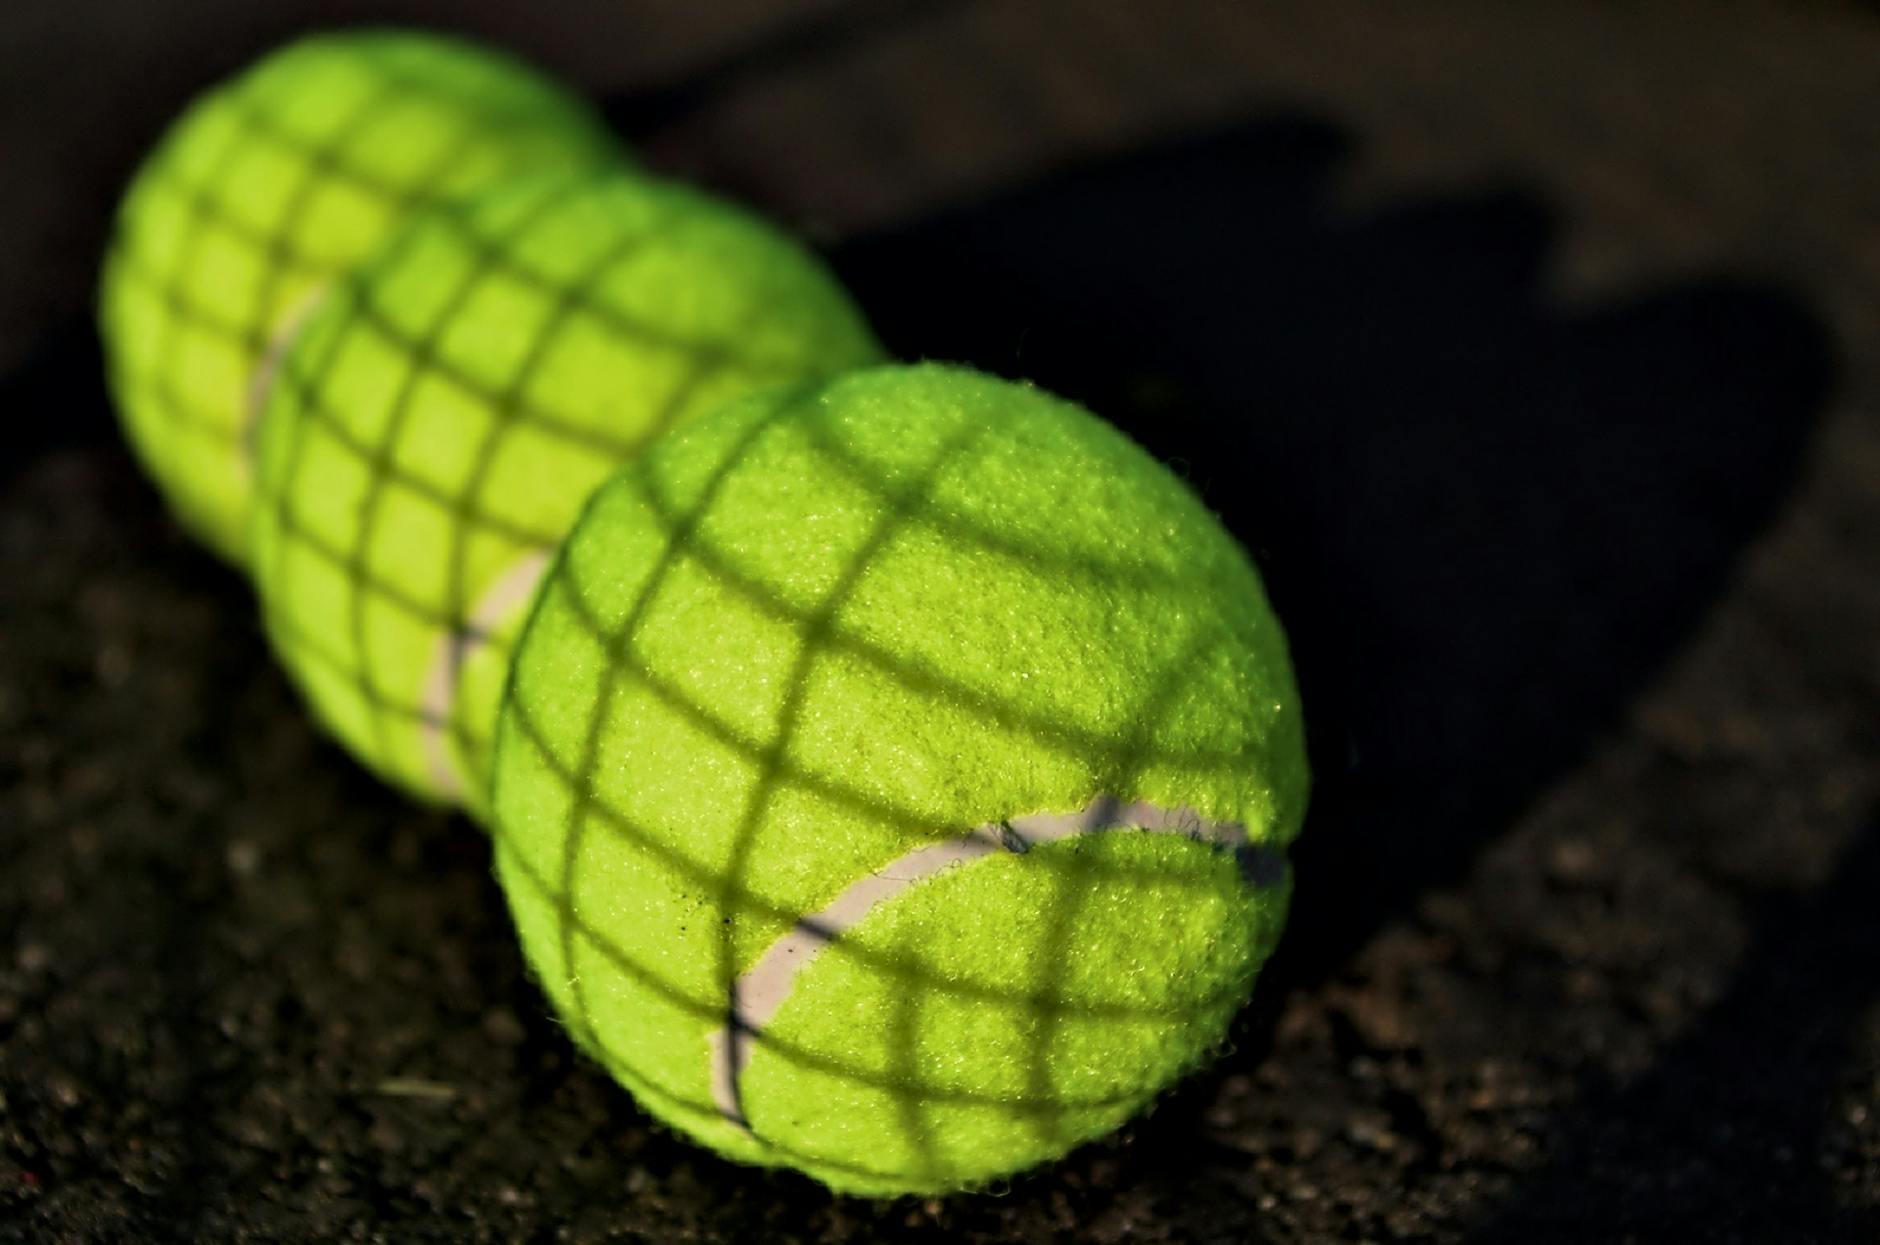 10 cool facts about the Wimbledon tennis tournament - Great British Mag